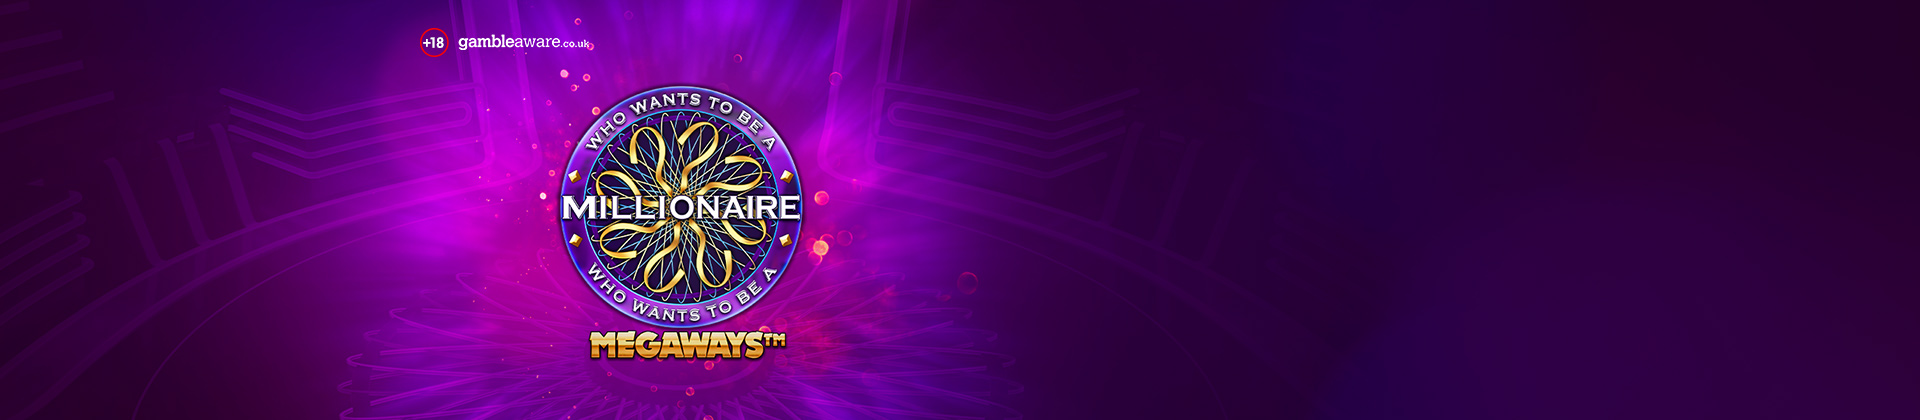 who-wants-to-be-a-millionaire-banner